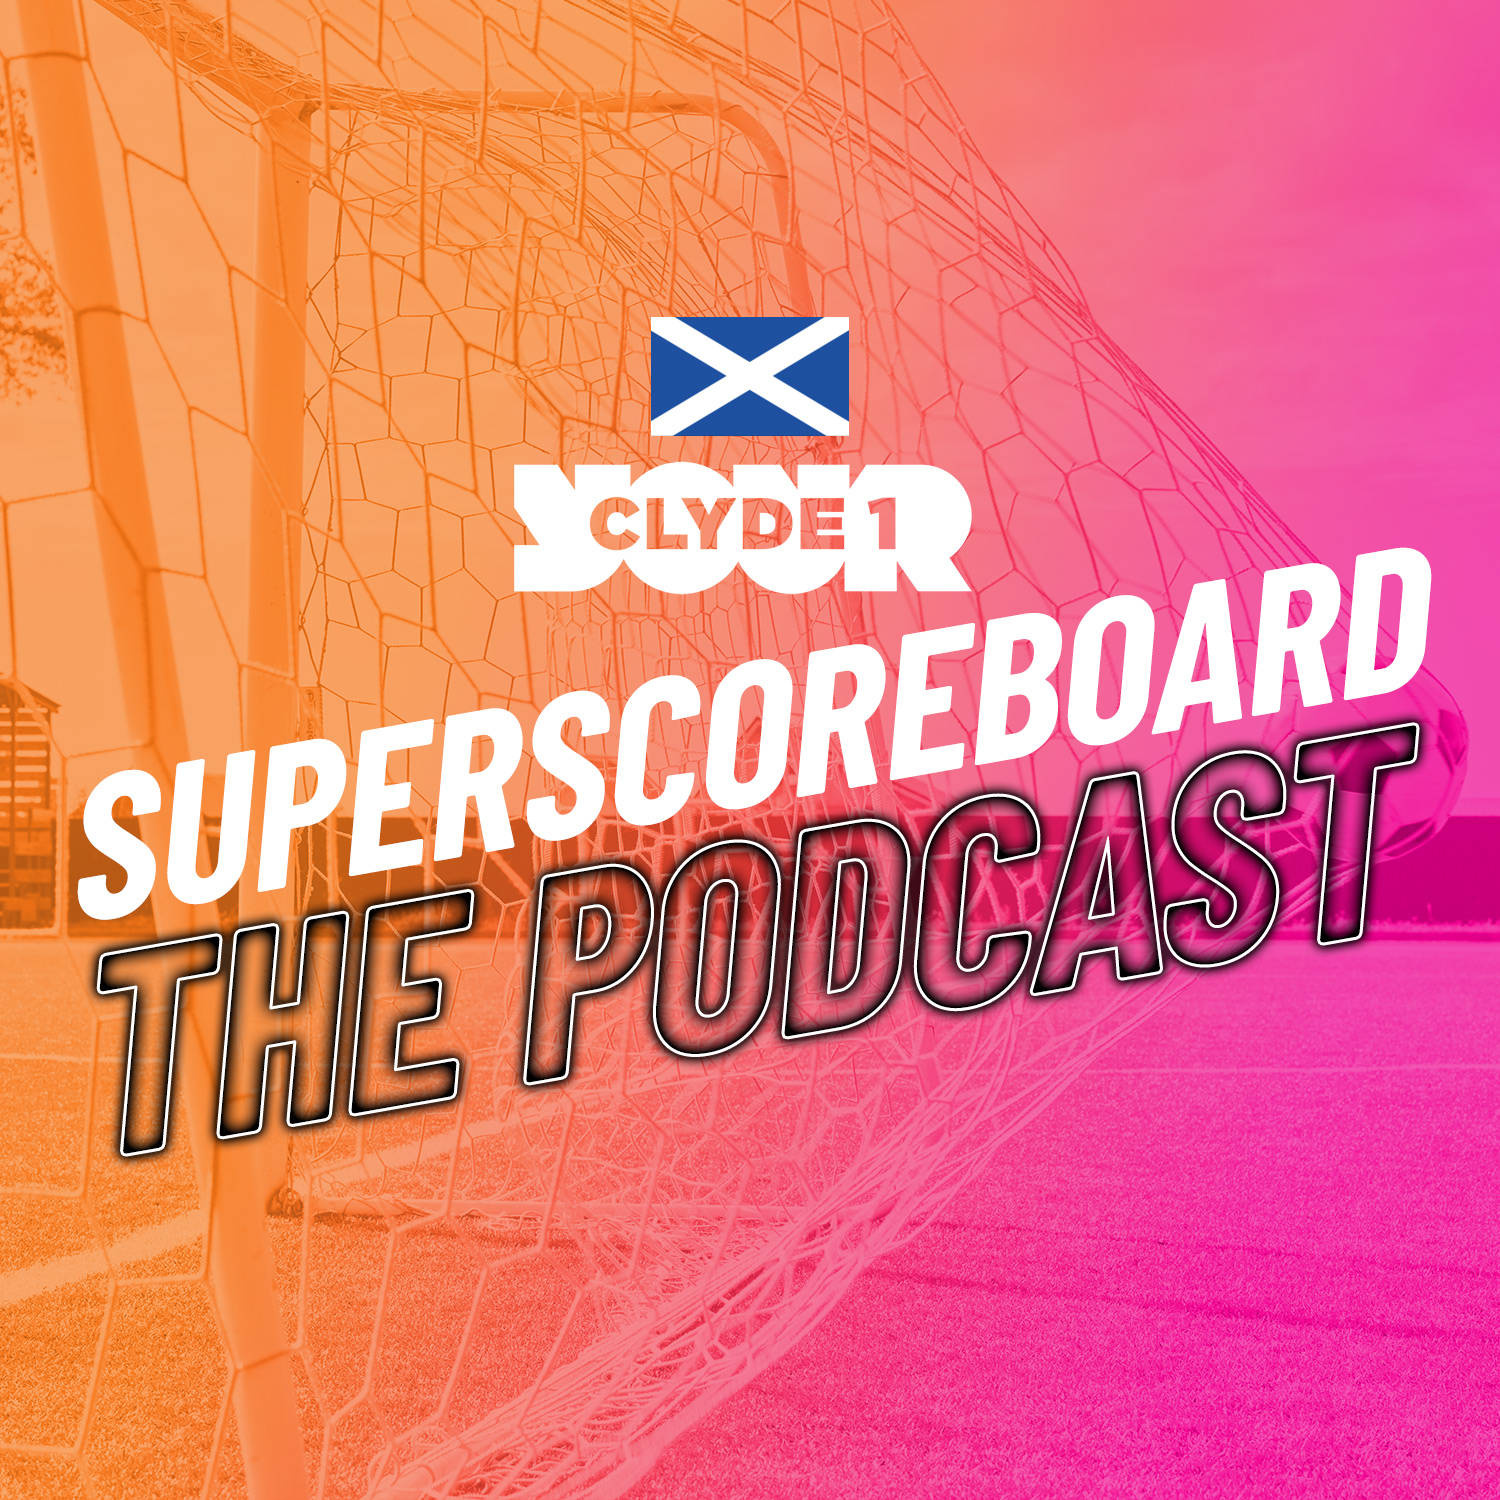 Monday 6th May Clyde 1 Superscoreboard